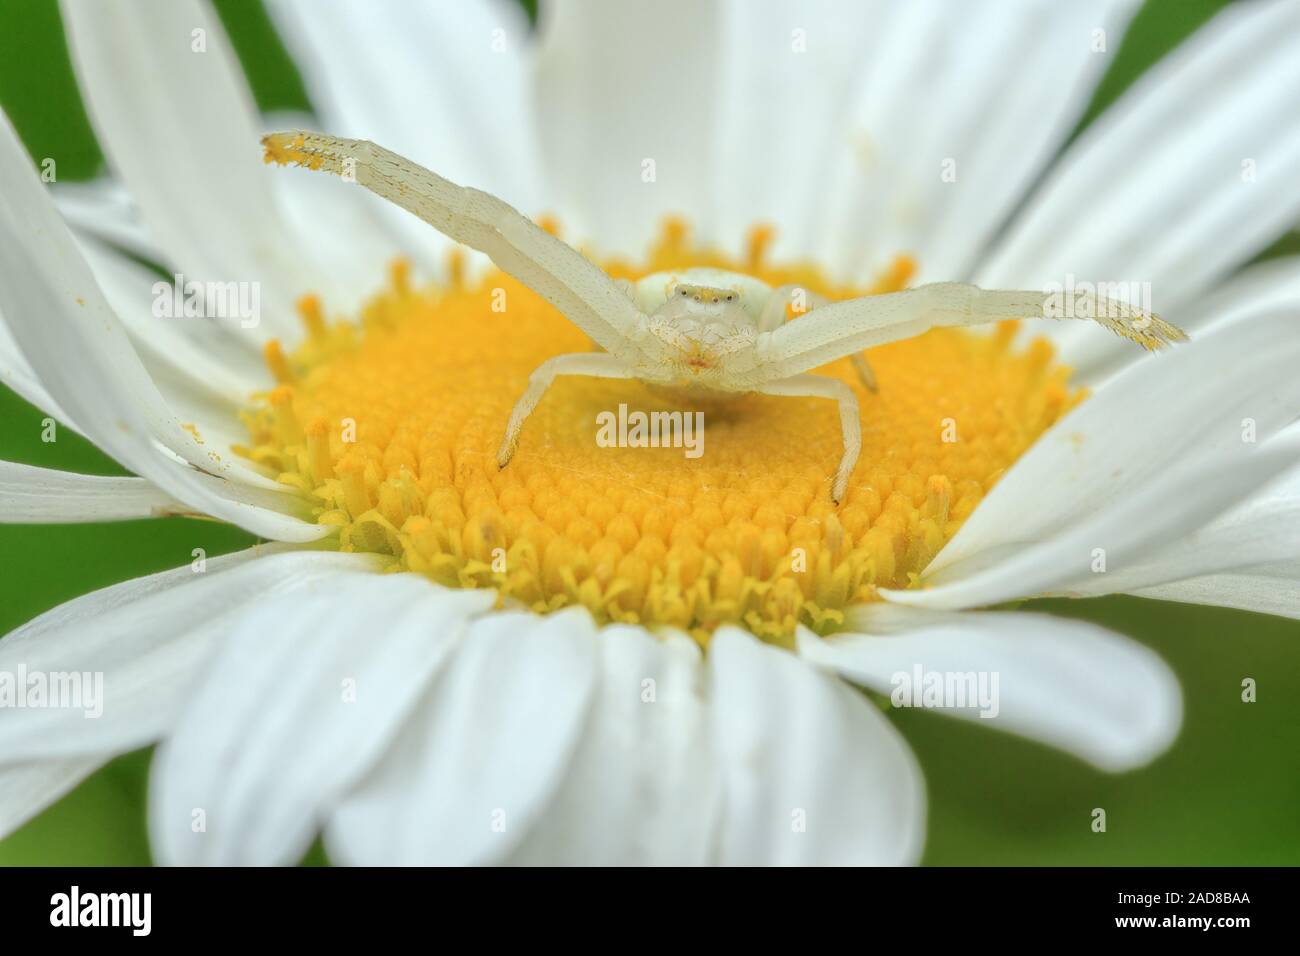 A Goldenrod Crab Spider on a Daisy. Stock Photo